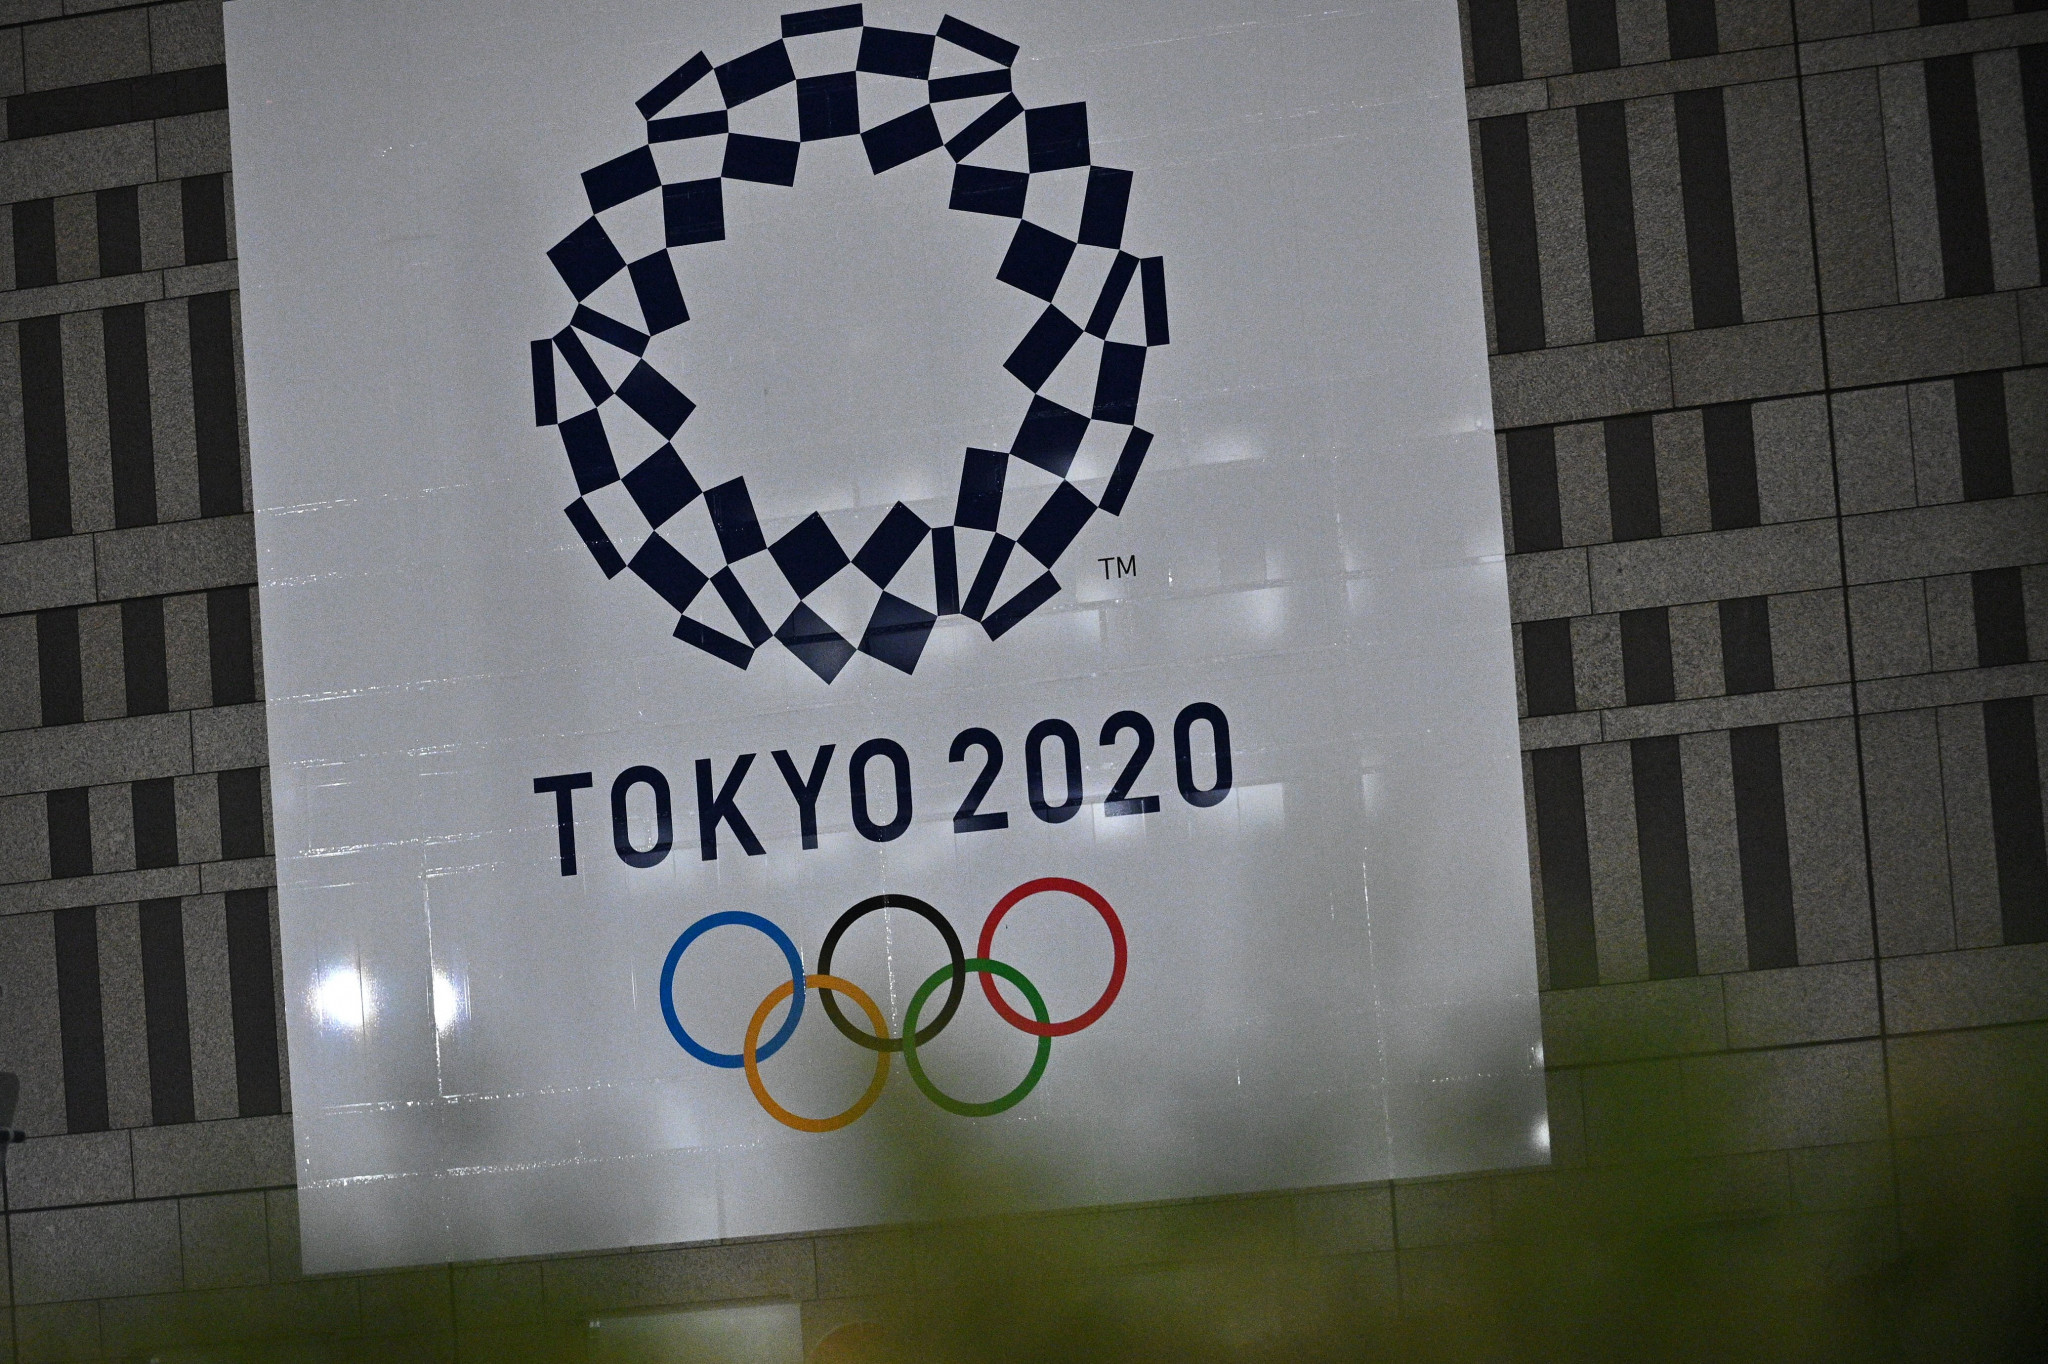 The original Tokyo 2020 Olympic logo ©Getty Images